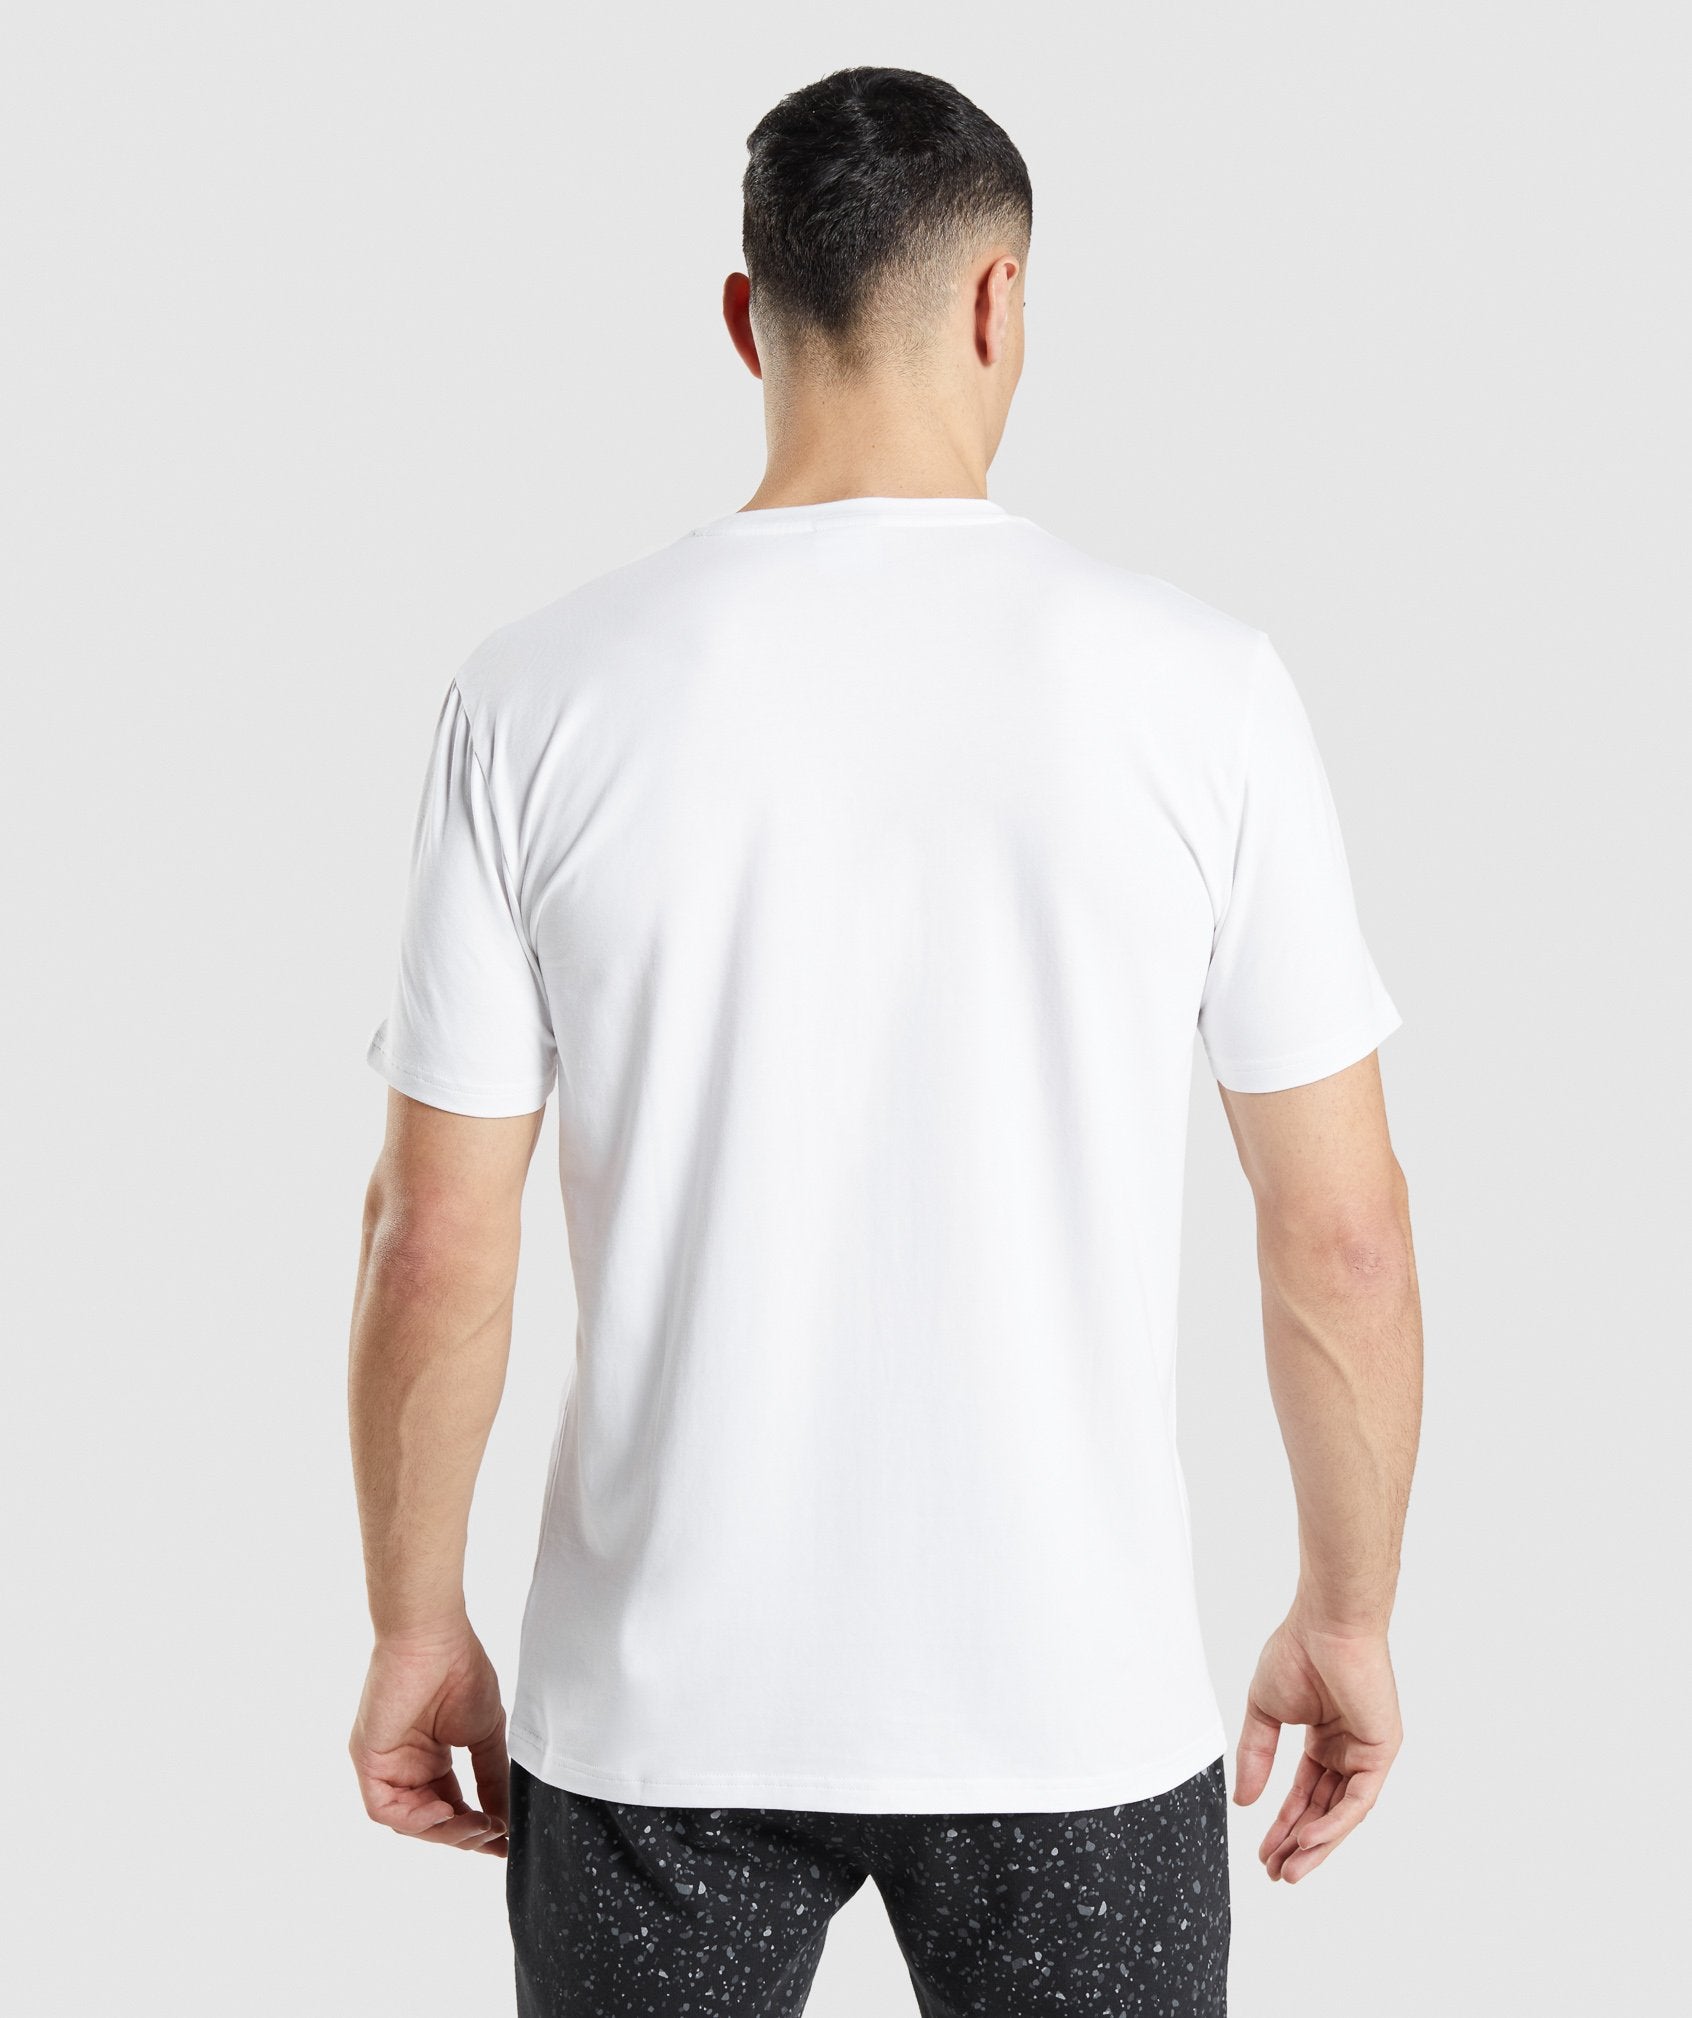 Micro Print Block Infill T-Shirt in White - view 2